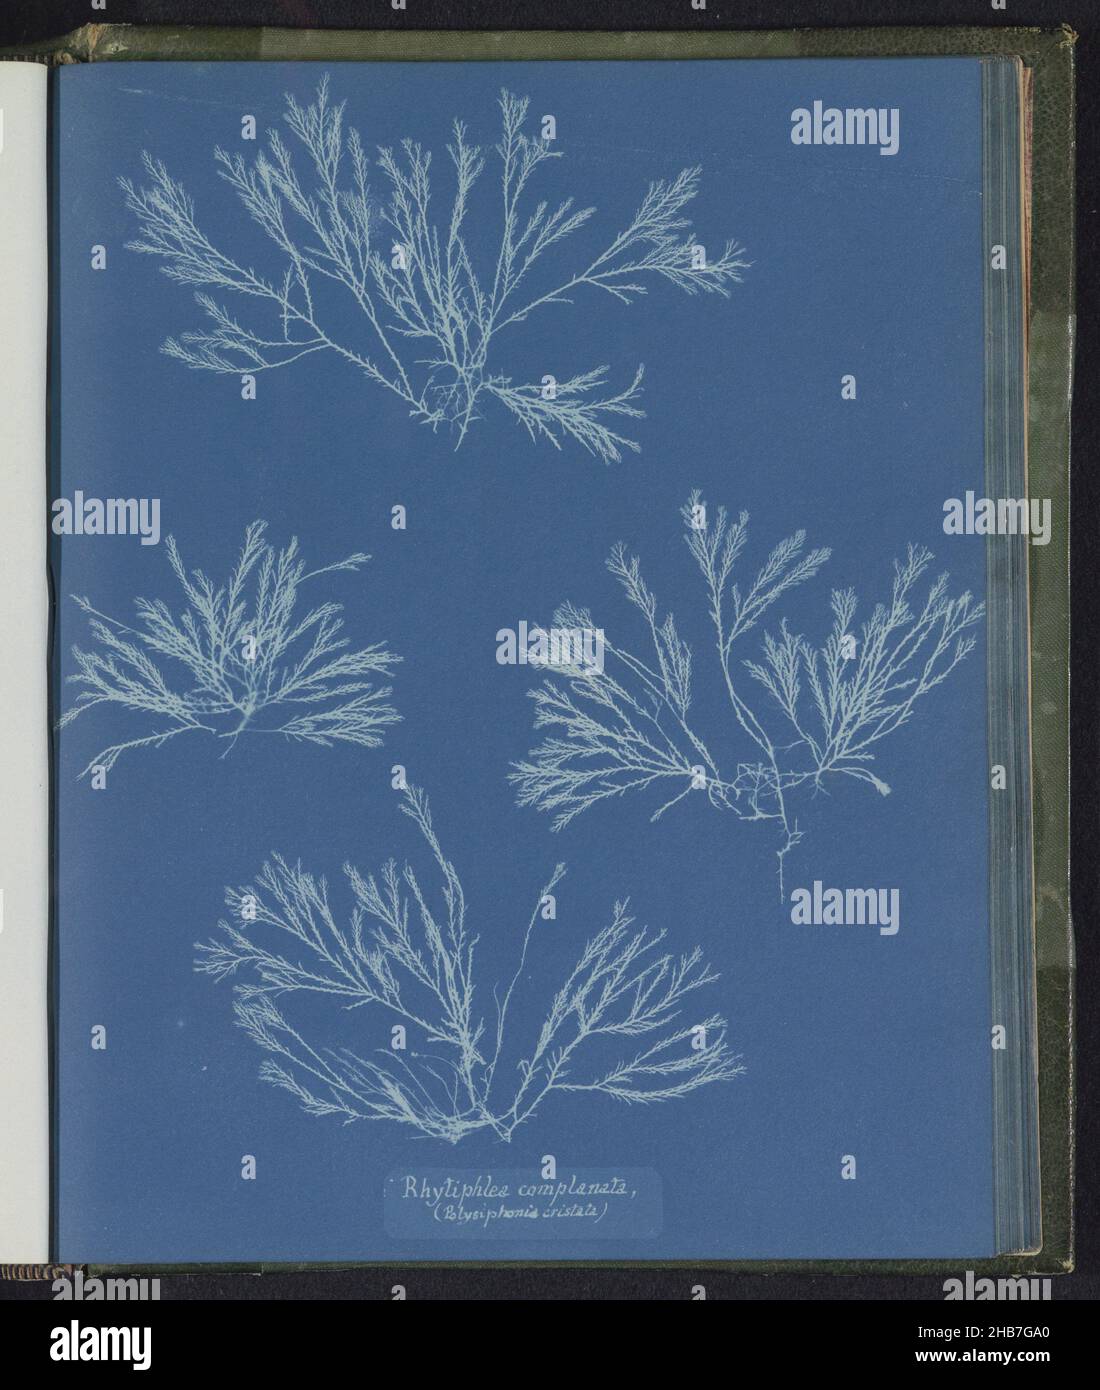 Rhytiphlea complanata, (Polysiphonia cristata), Anna Atkins, United Kingdom, c. 1843 - c. 1853, photographic support, cyanotype, height 250 mm × width 200 mm Stock Photo